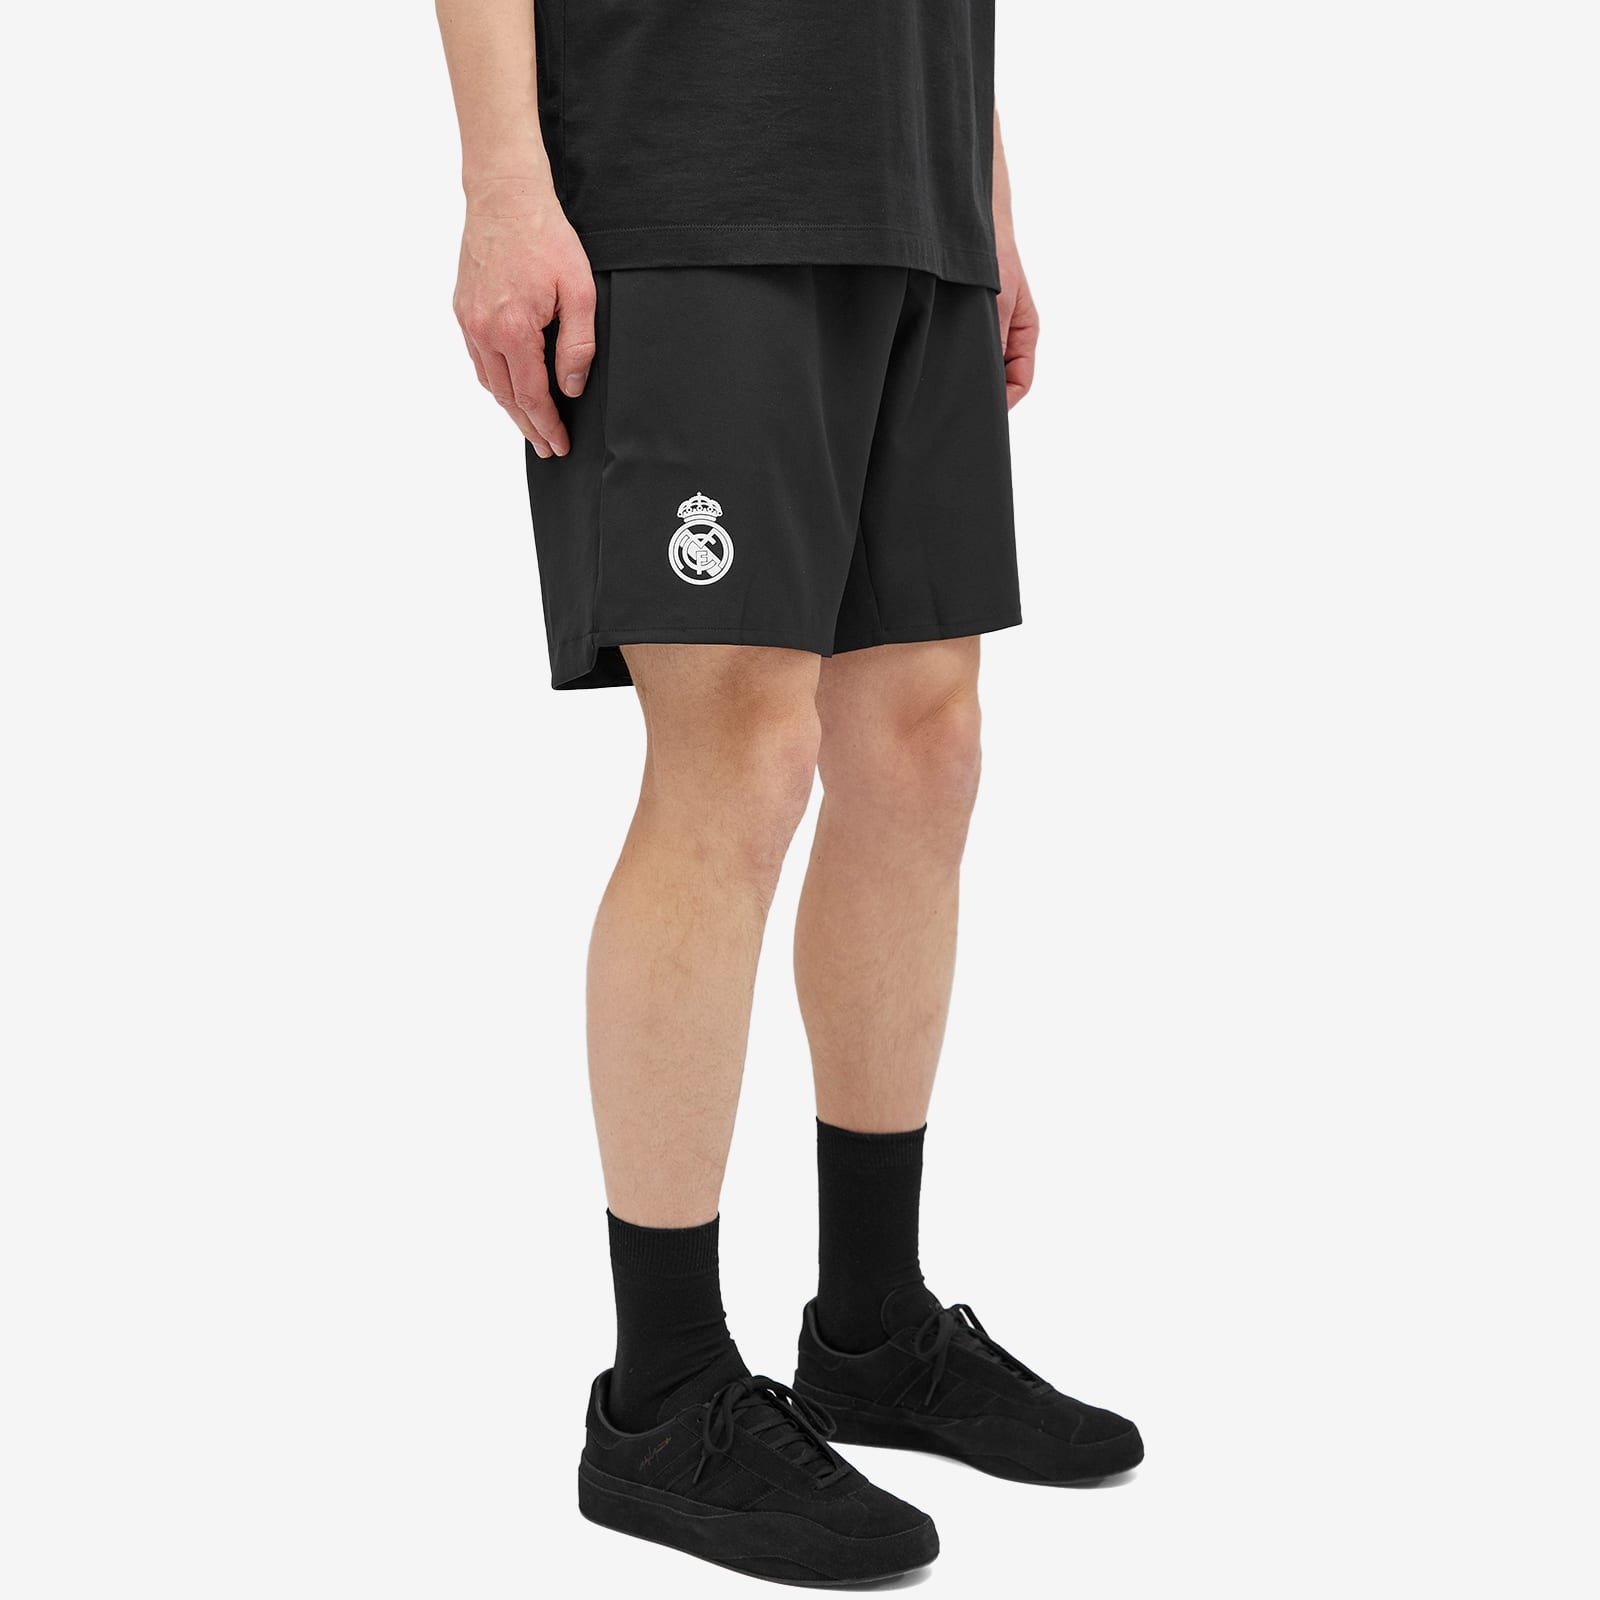 Y-3 x Real Madrid 4th Goalkeeper Jersey Shorts - 2